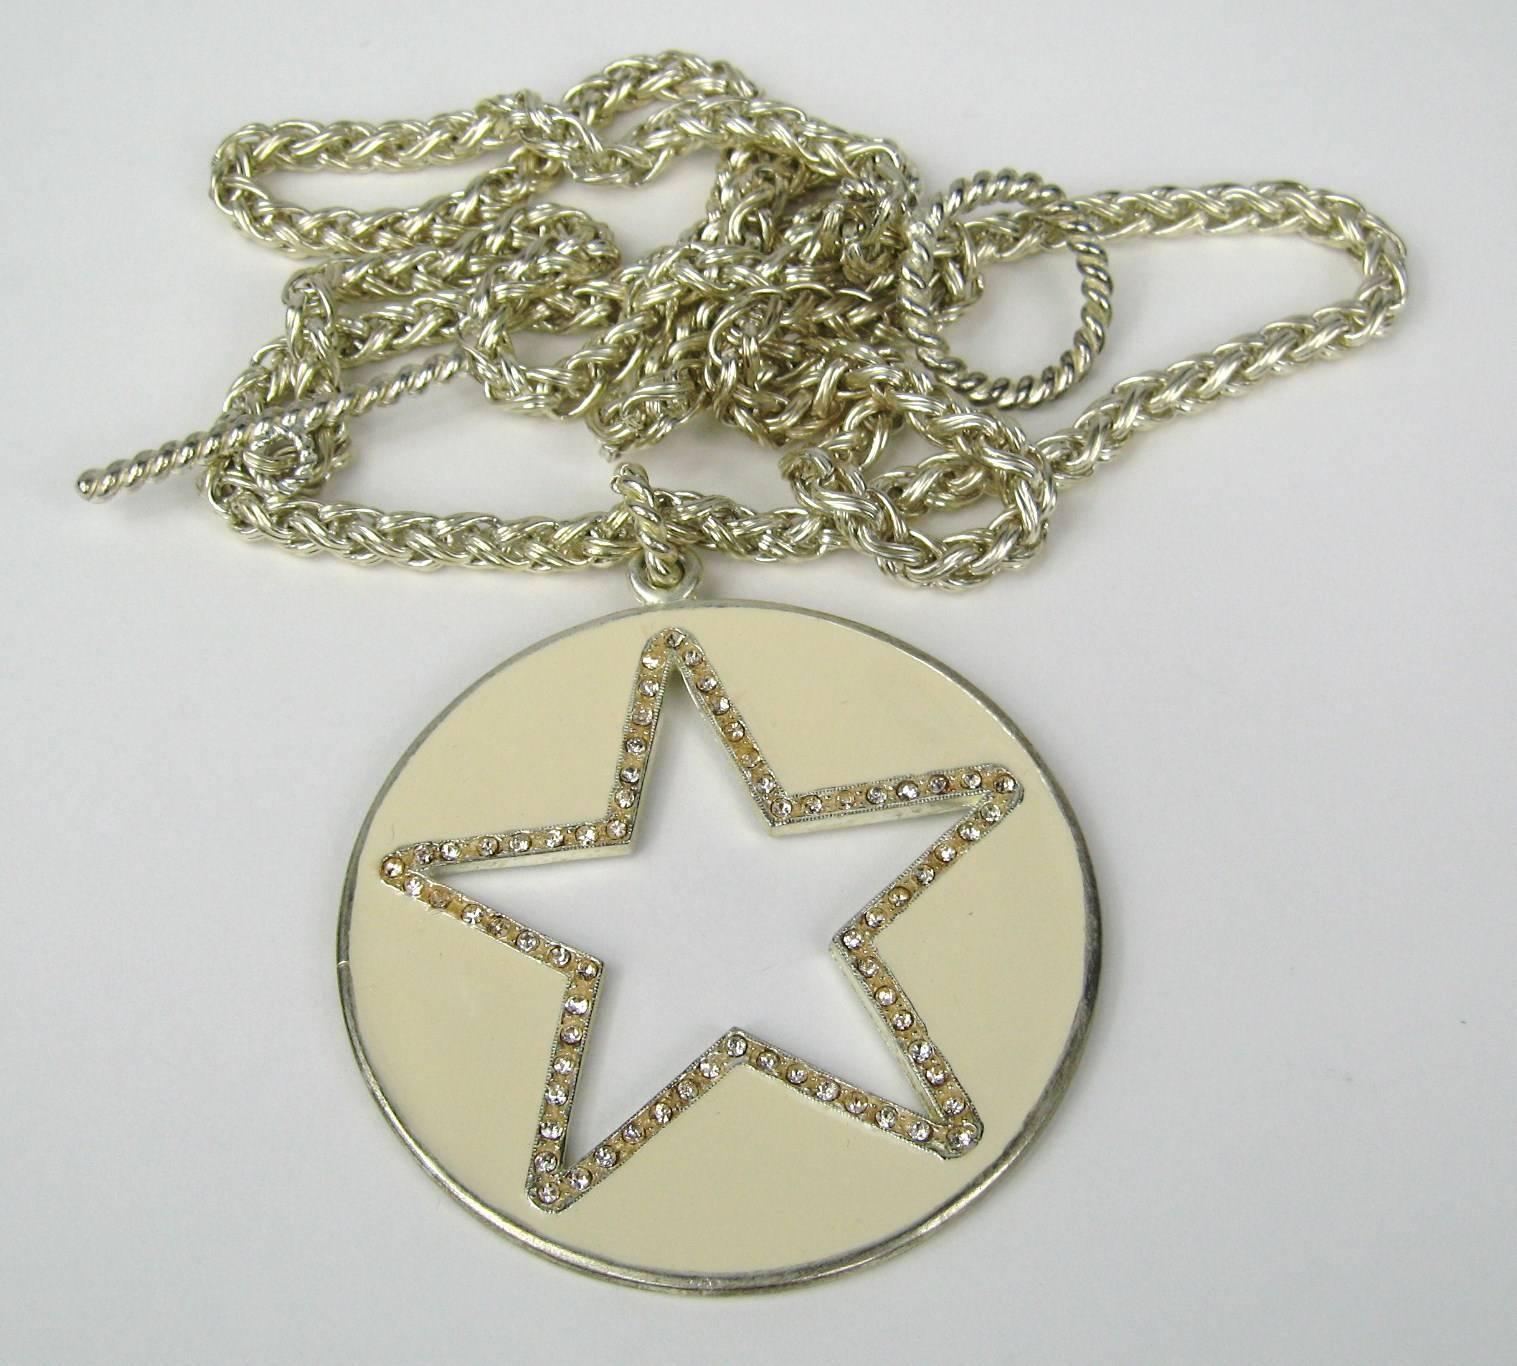 Cream colored enamel Star cut out with crystals surrounding the star. Long 43 in chain end to end Star pendant measures 2.85 in diameter. This is out of a massive collection of Hopi, Zuni, Navajo, Southwestern, sterling silver, costume jewelry and